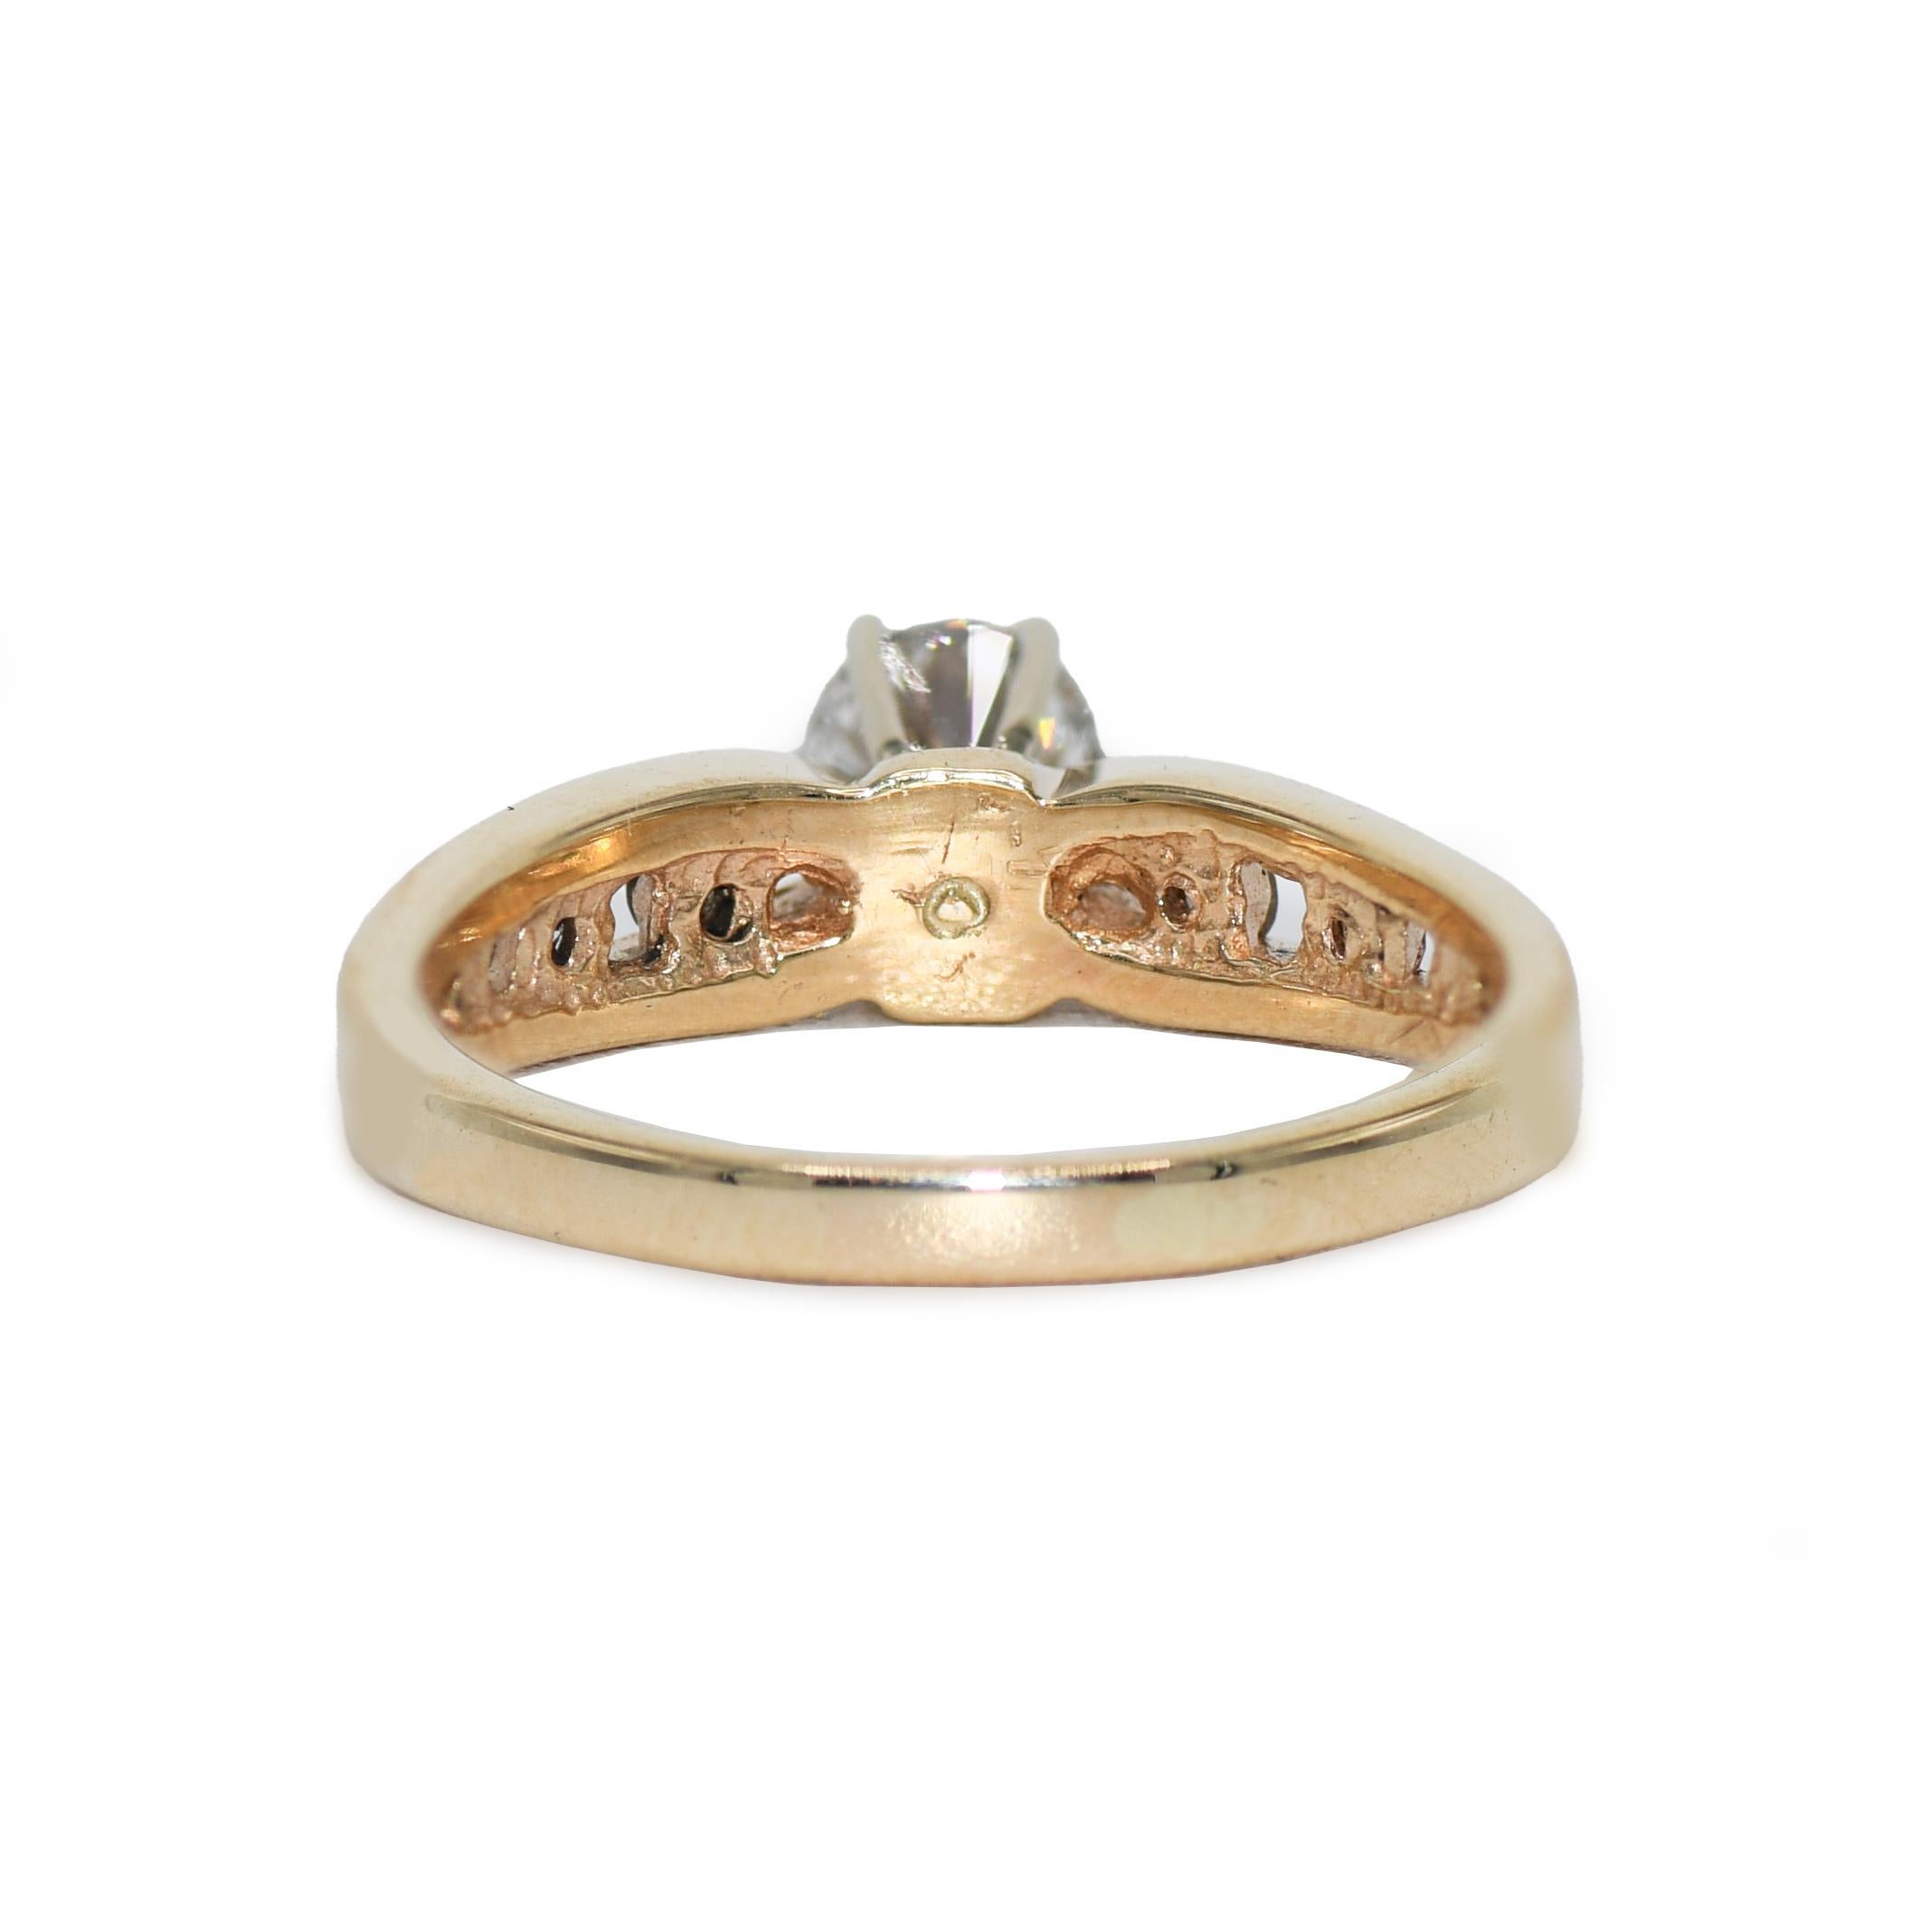 14K Yellow Gold Diamond Ring 0.50 tdw, 3.6g In Excellent Condition For Sale In Laguna Beach, CA